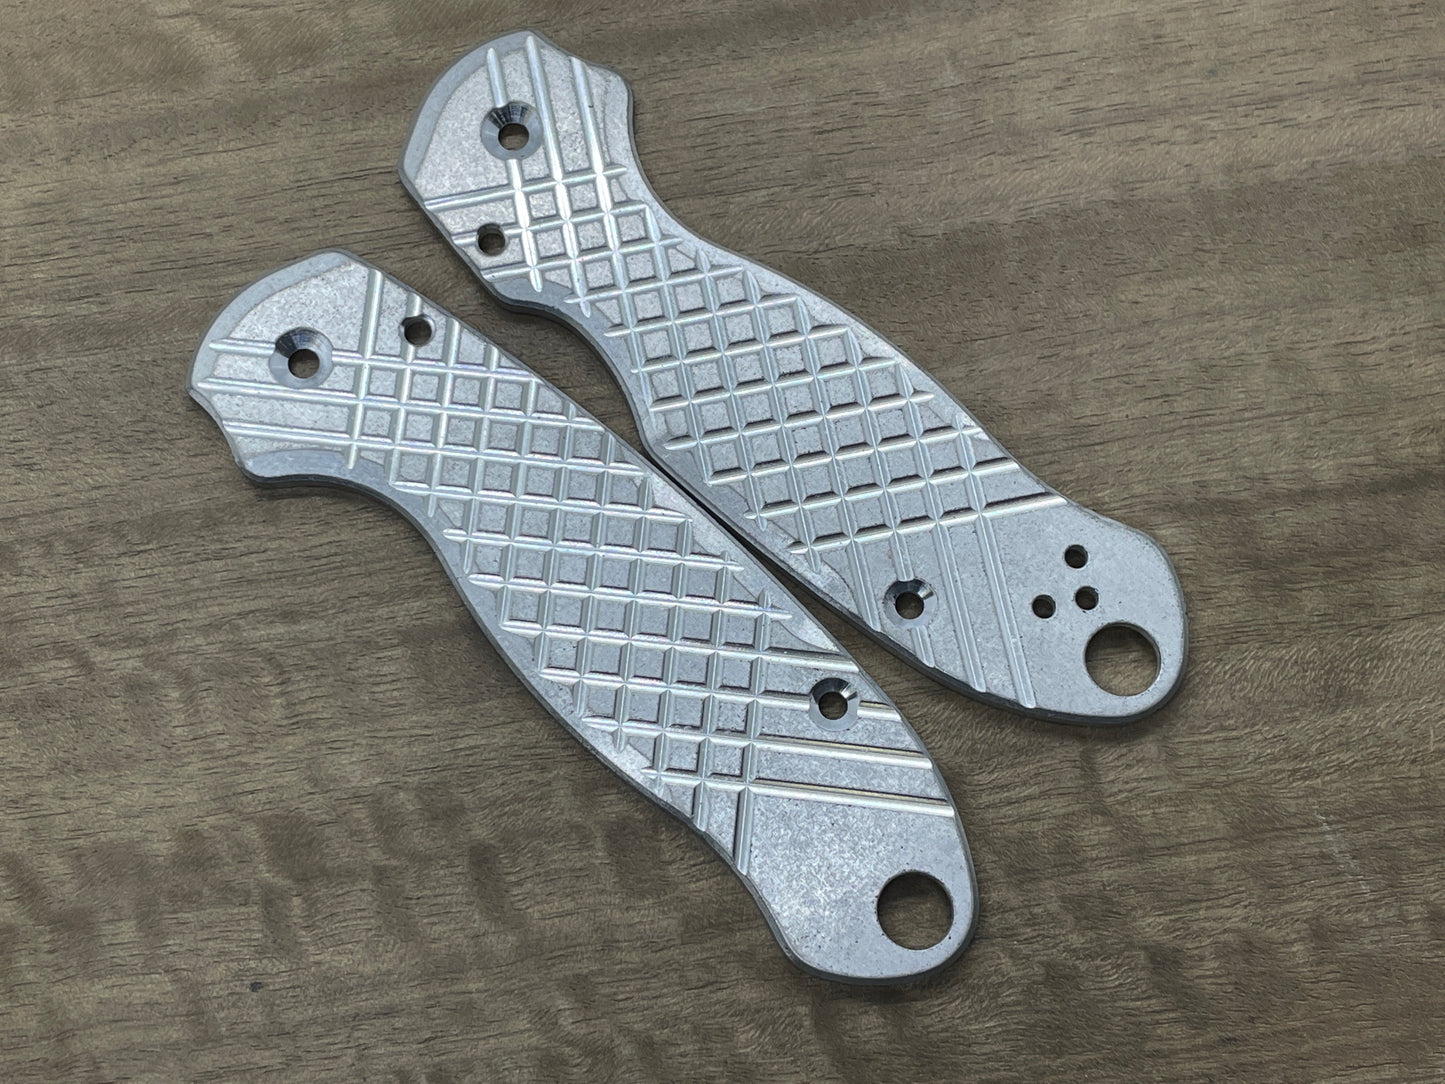 TUMBLED FRAG milled Aerospace Aluminum Scales for Spyderco Para 3